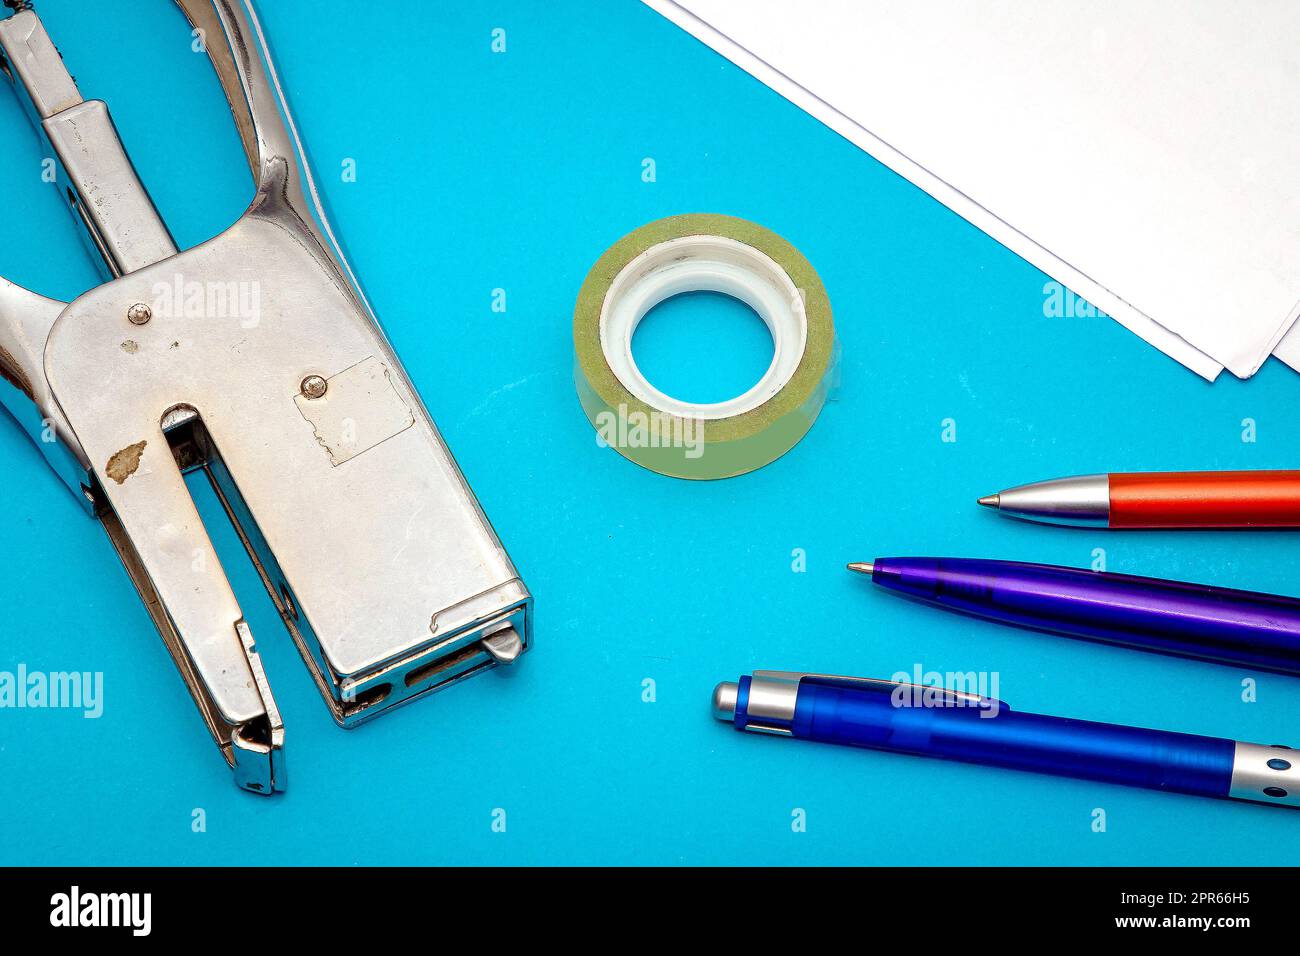 Office stationery tools details Stock Photo